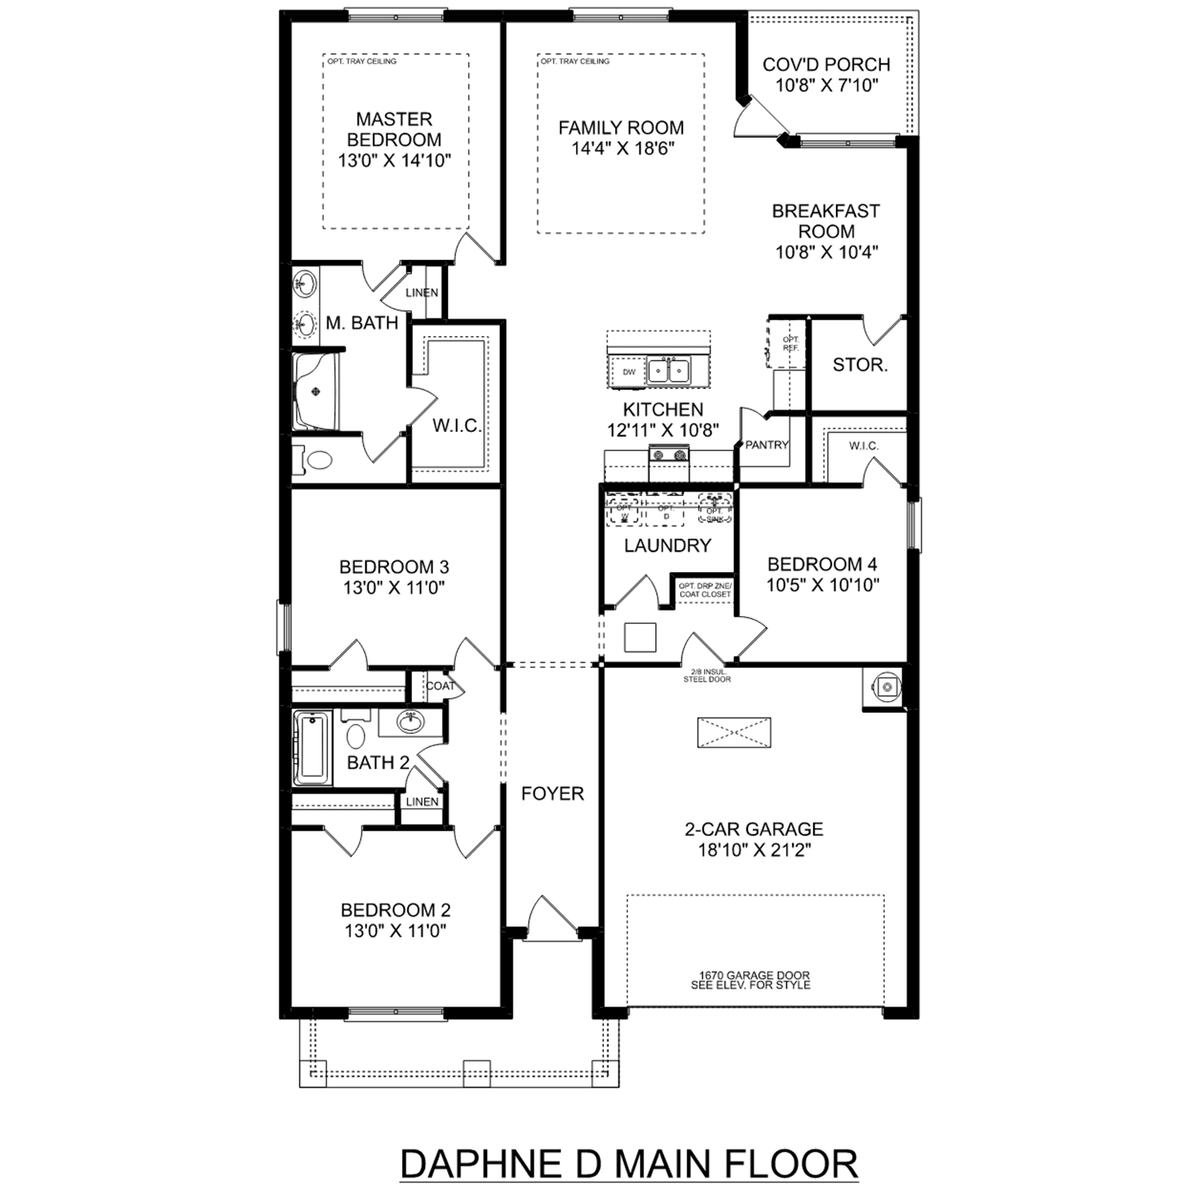 1 - The Daphne D floor plan layout for 183 Fall Meadow Drive in Davidson Homes' Durham Farms community.